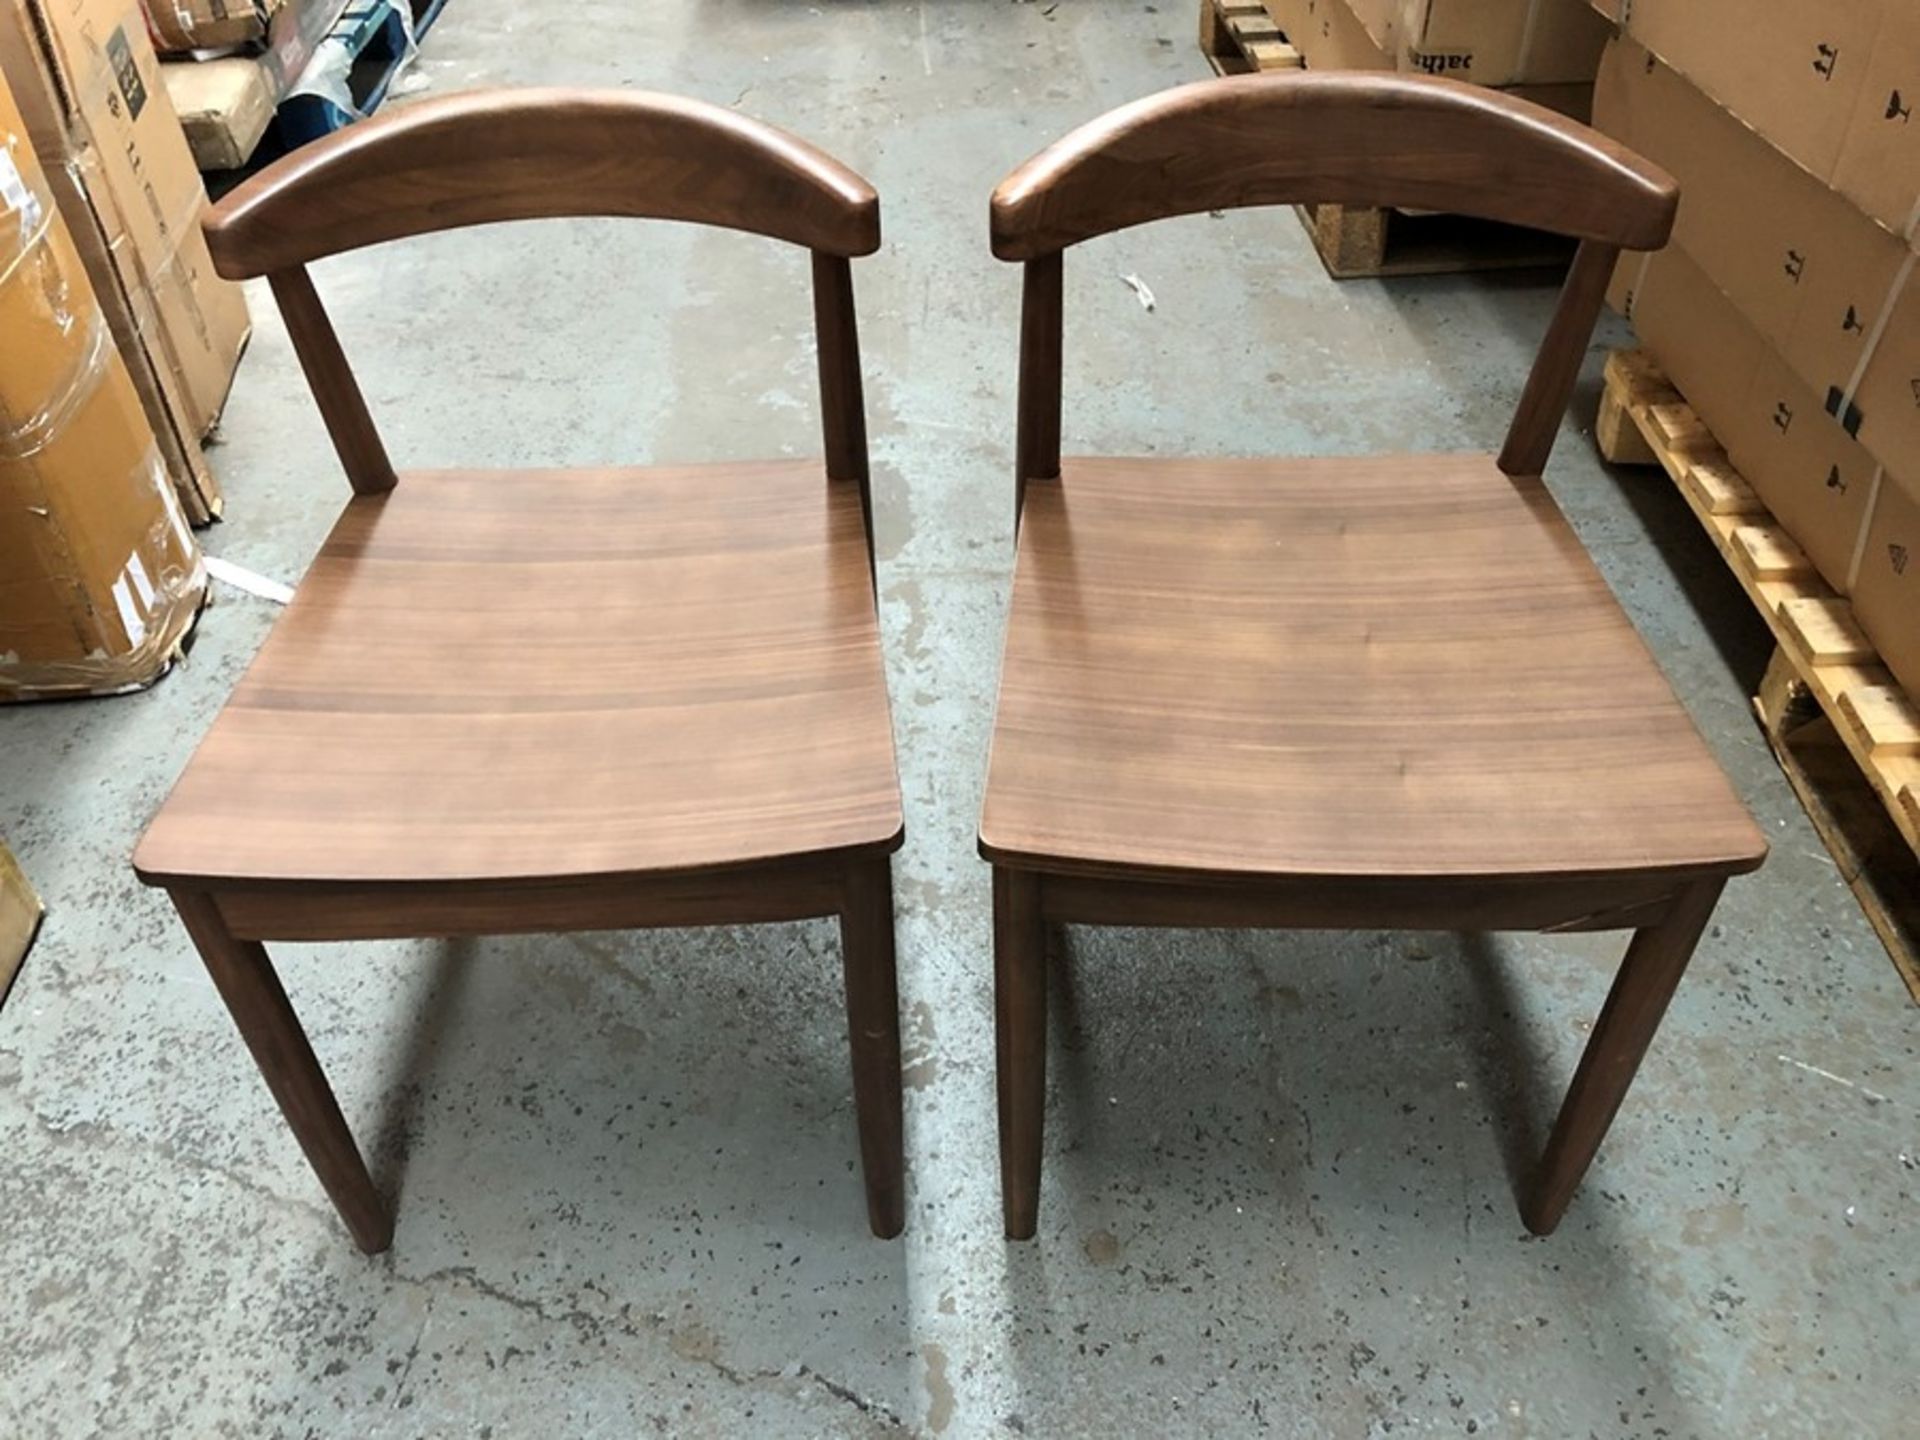 LA REDOUTE GALB WOODEN CHAIRS (SET OF 2) - Image 2 of 3